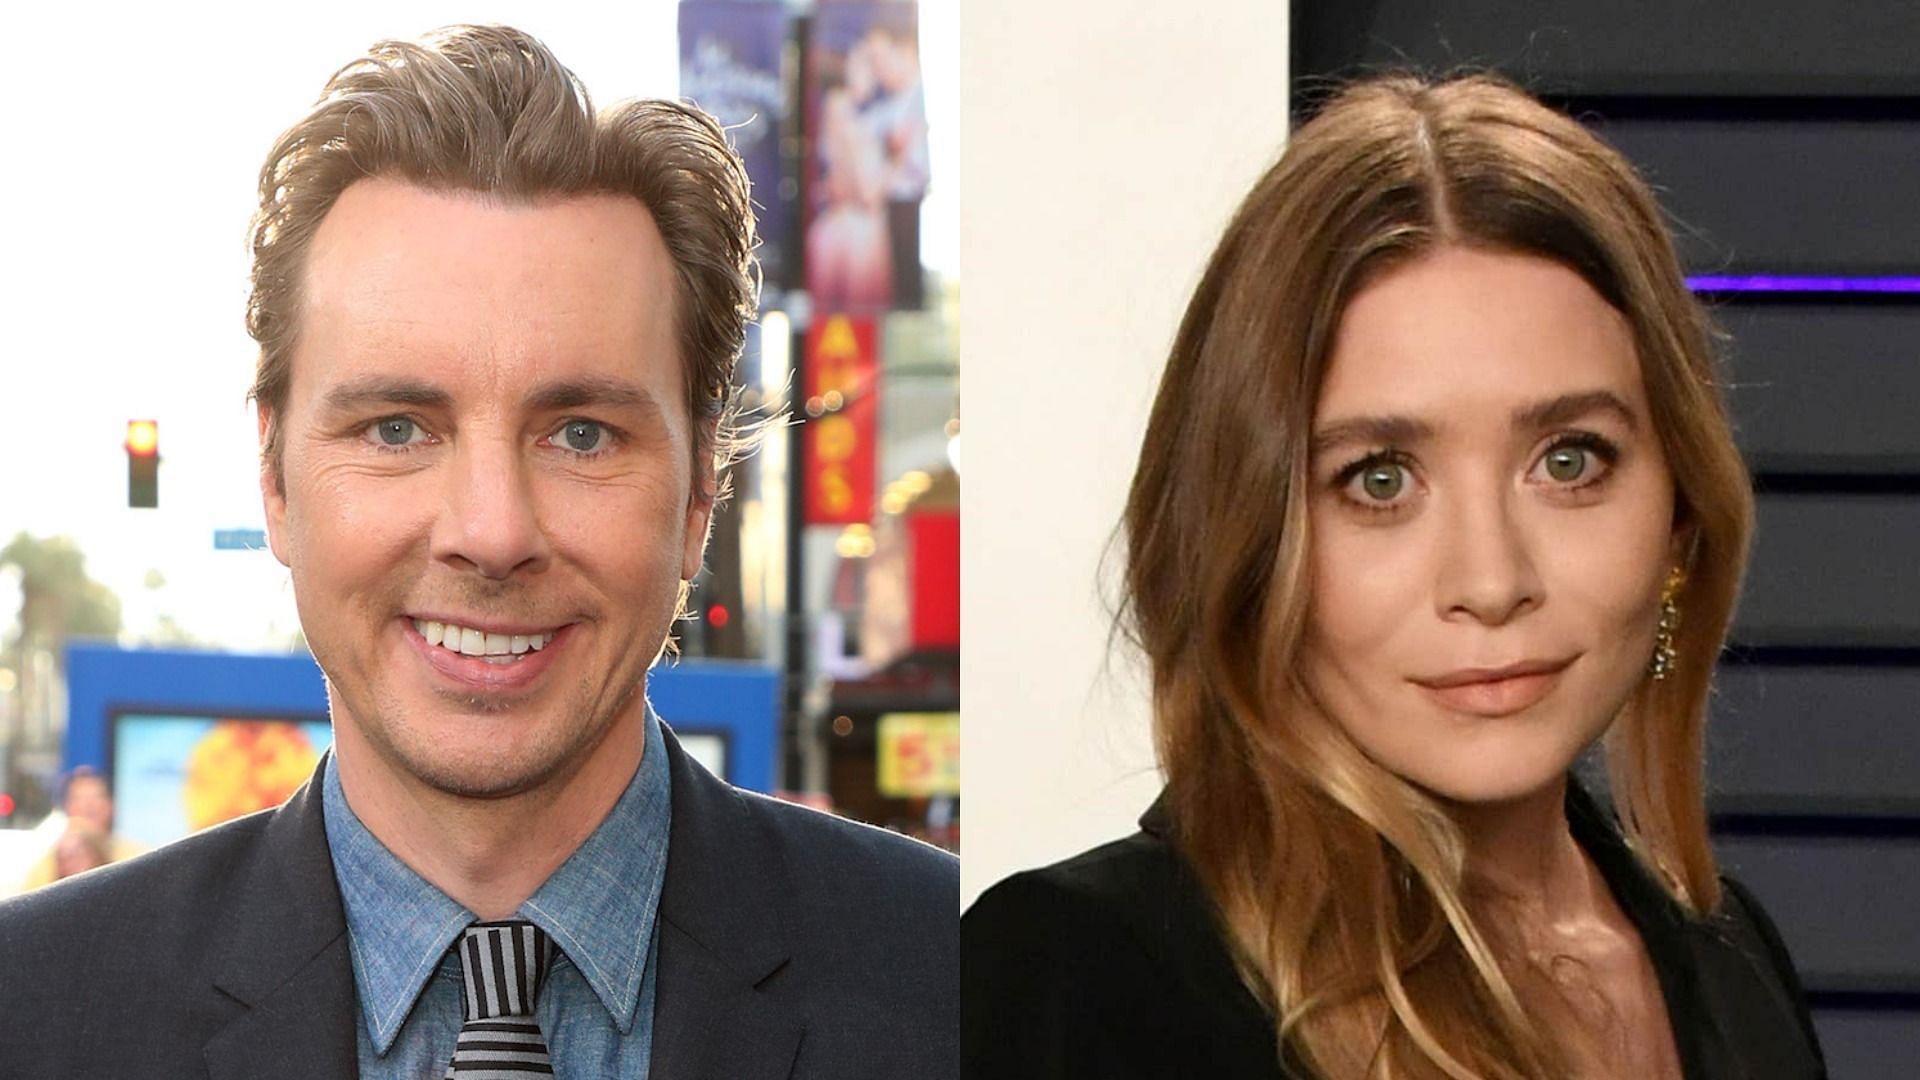 Dax Shepard and Ashley Olsen (Images via Shutterstock and WireImage)